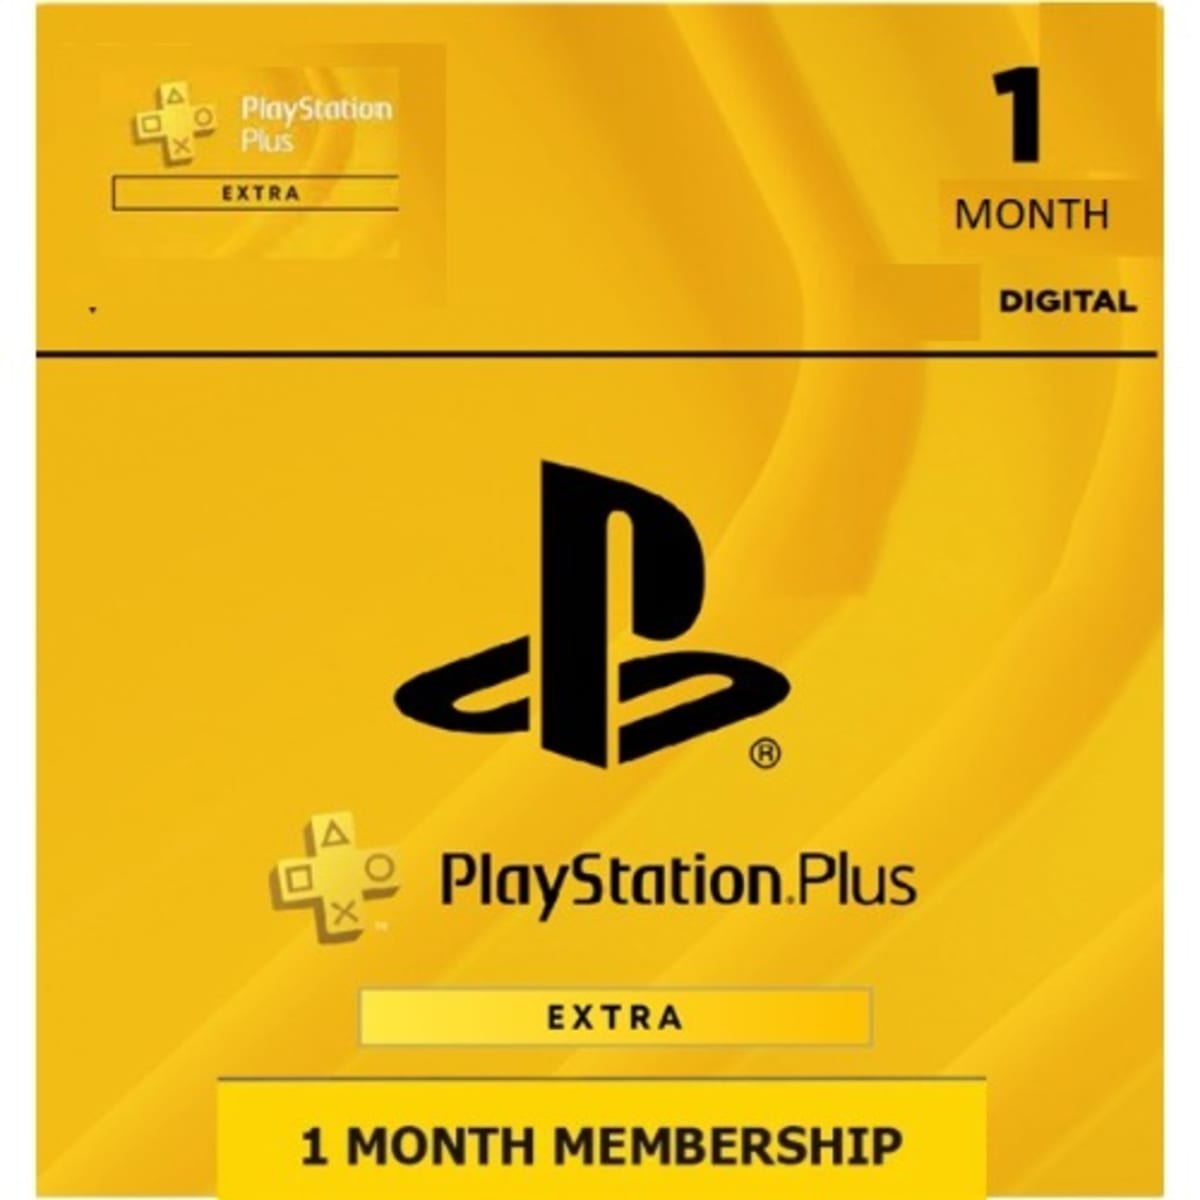 PlayStation Plus Extra 1 month